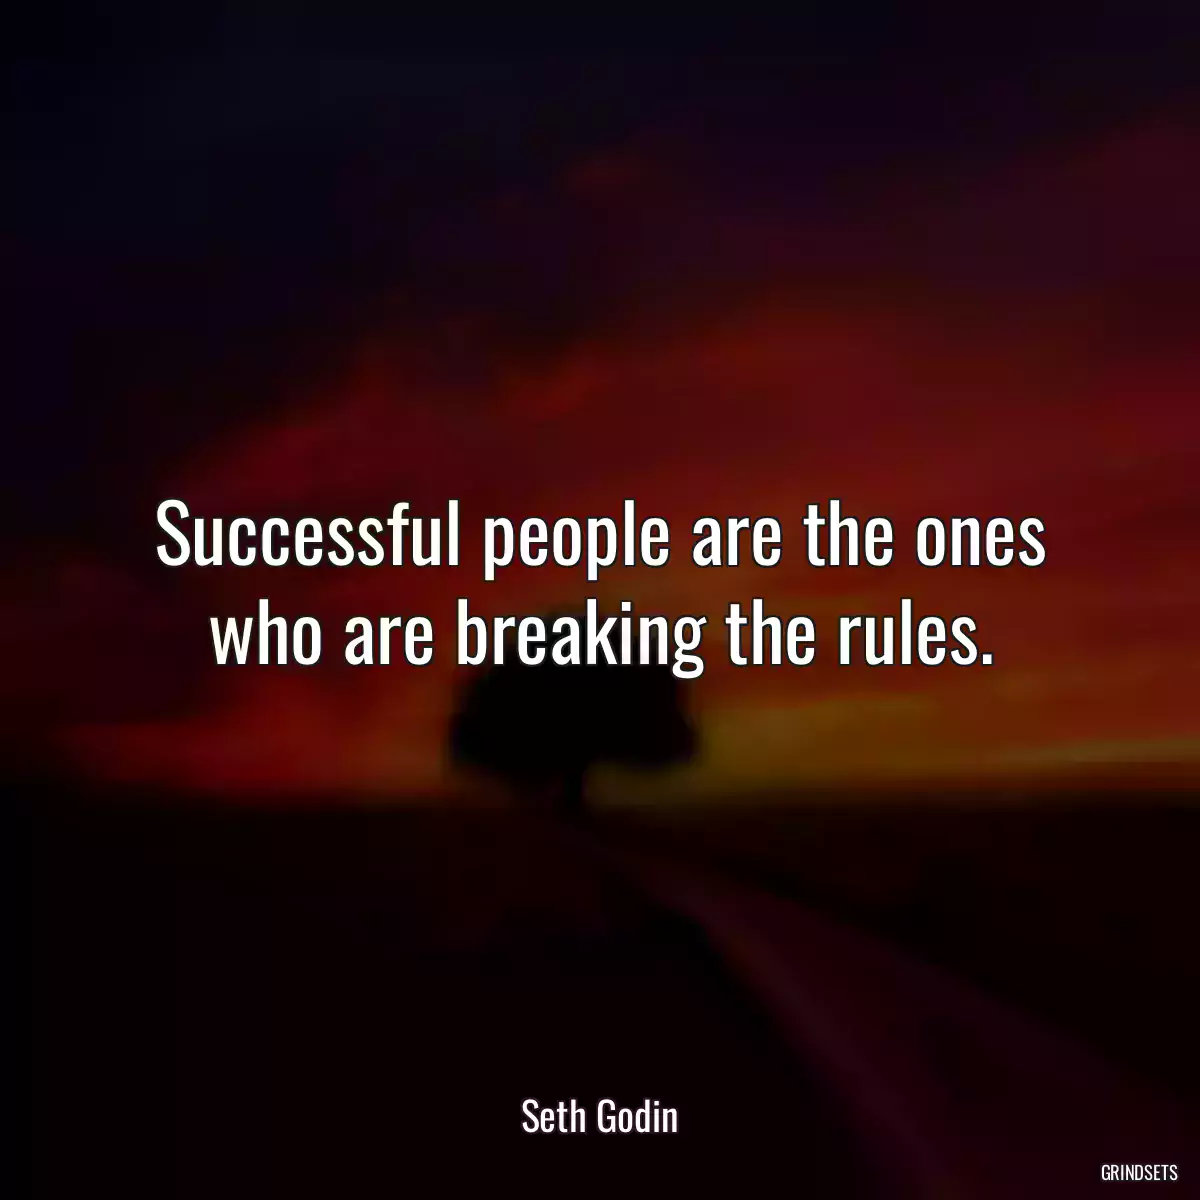 Successful people are the ones who are breaking the rules.